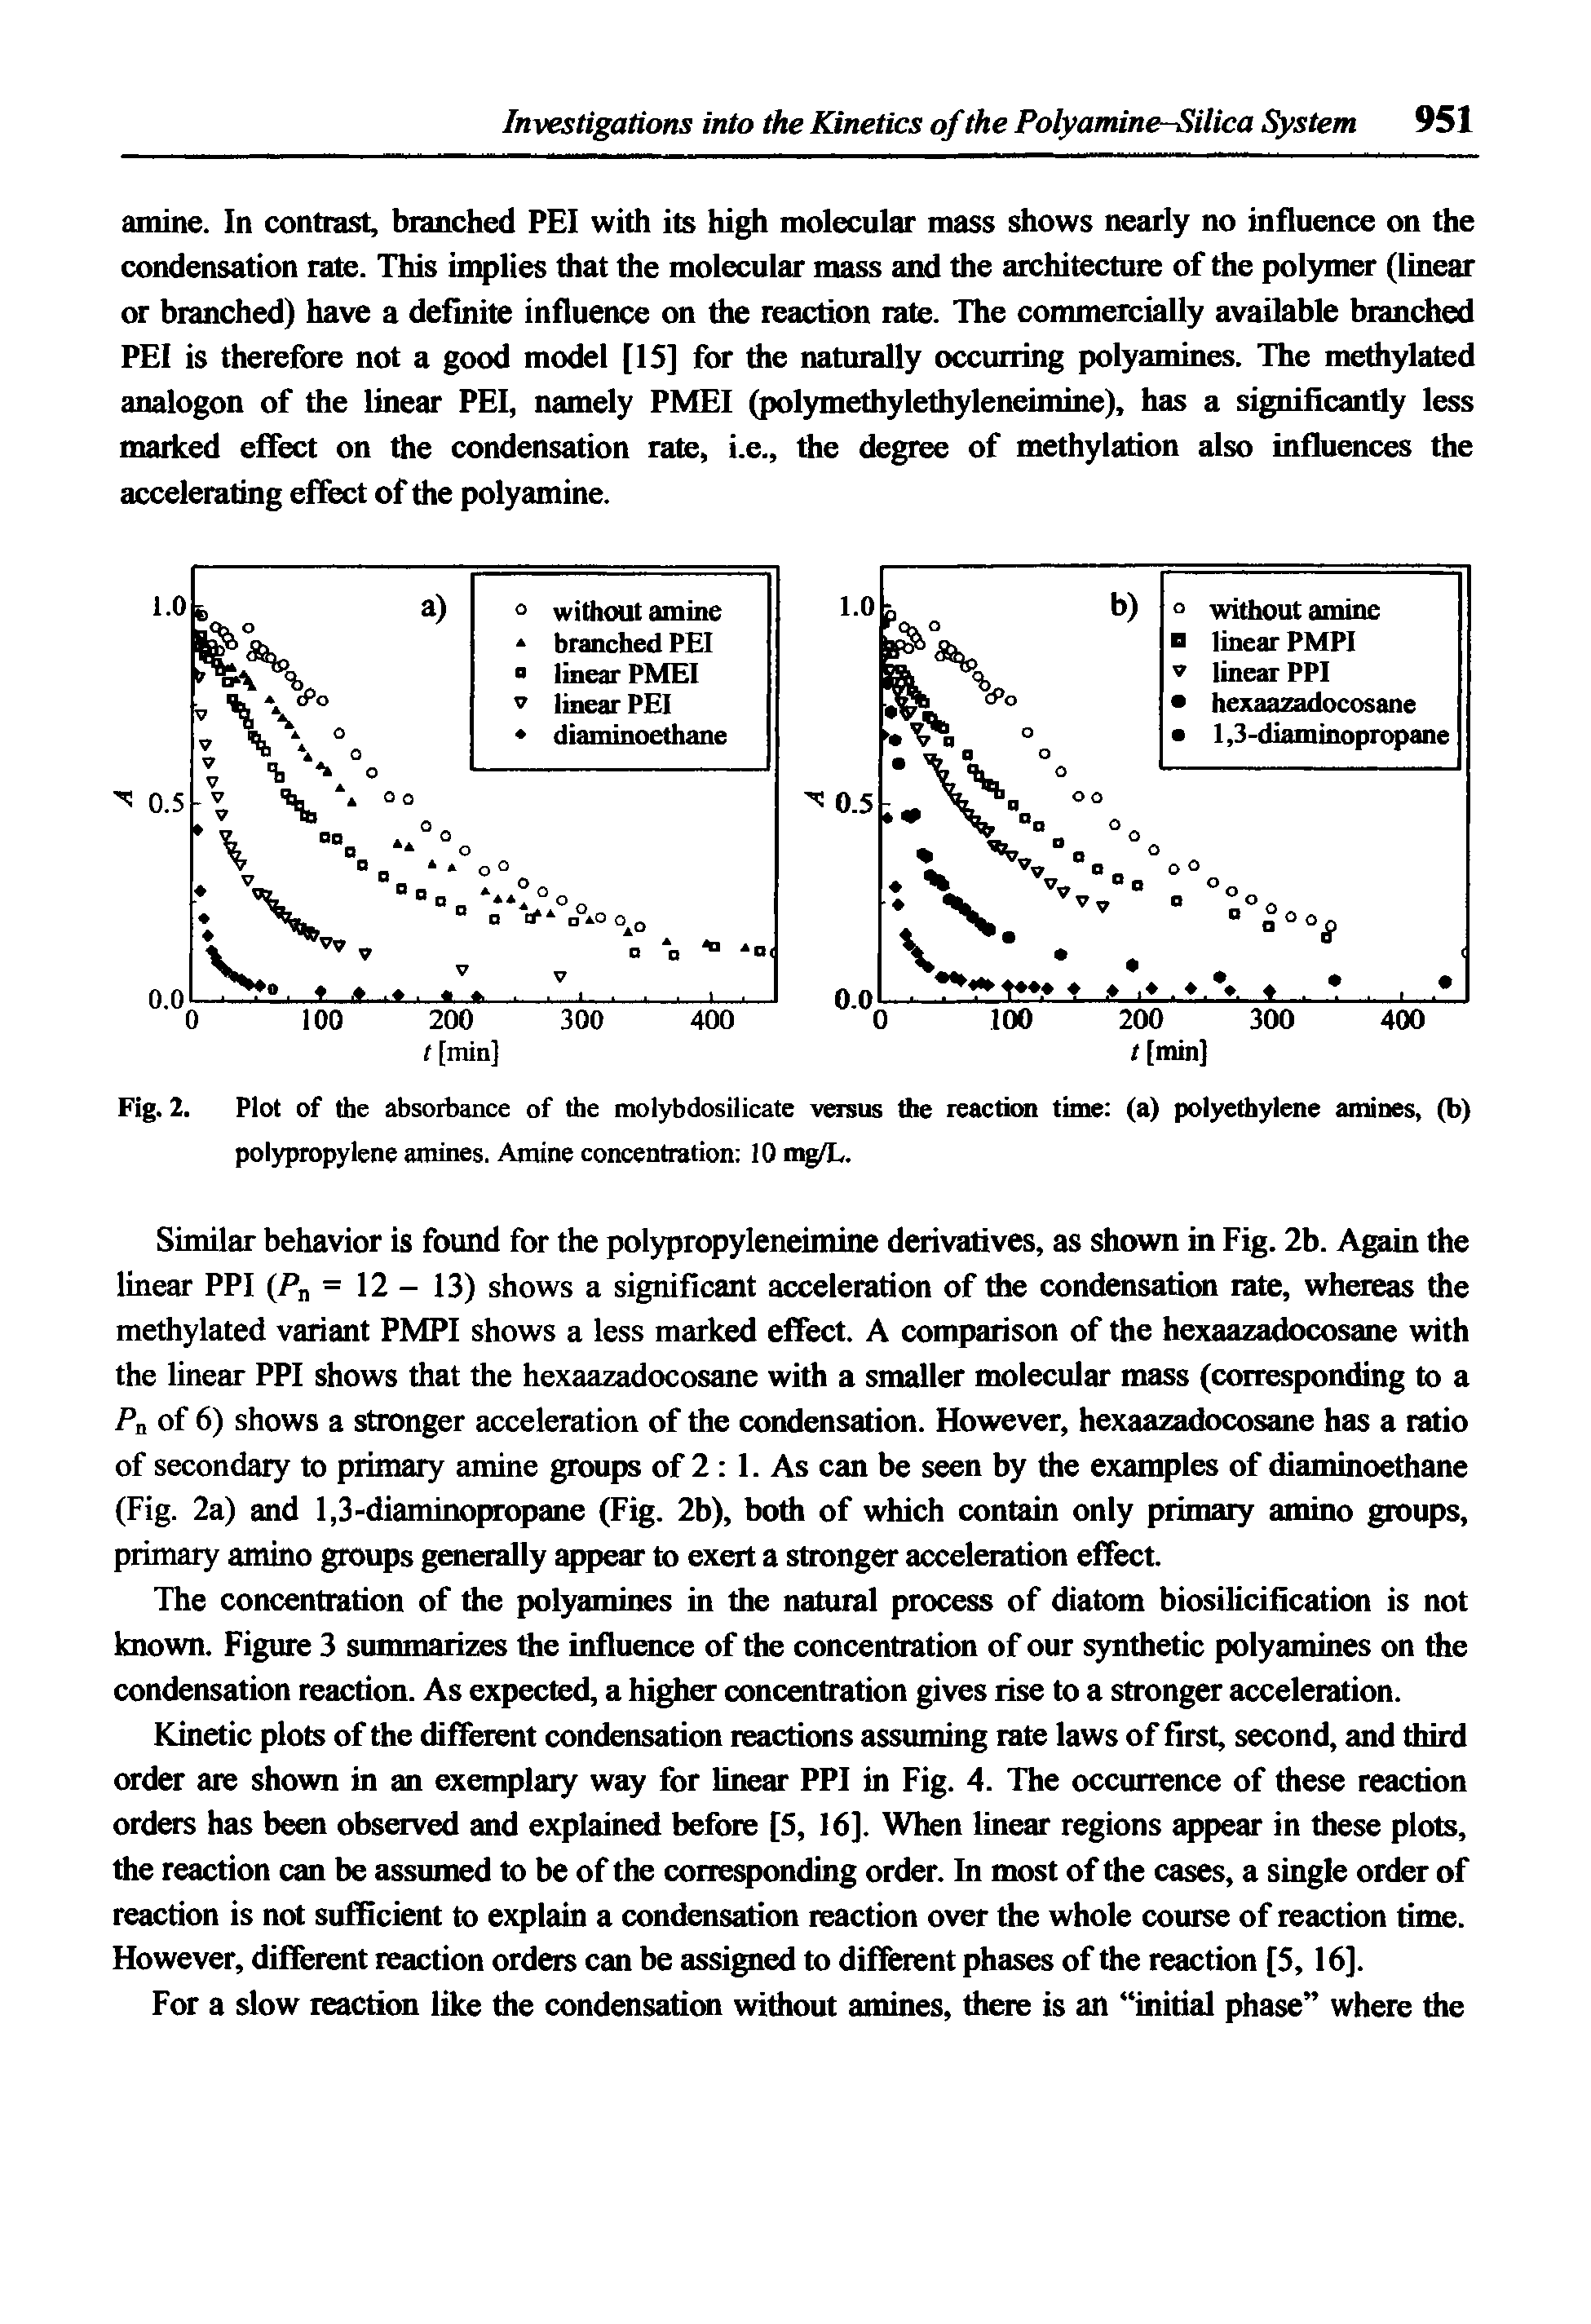 Fig. 2. Plot of the absorbance of the molybdosilicate versus the reaction time (a) polyethylene amines, (b) polypropylene amines. Amine concentration 10 mg/L.